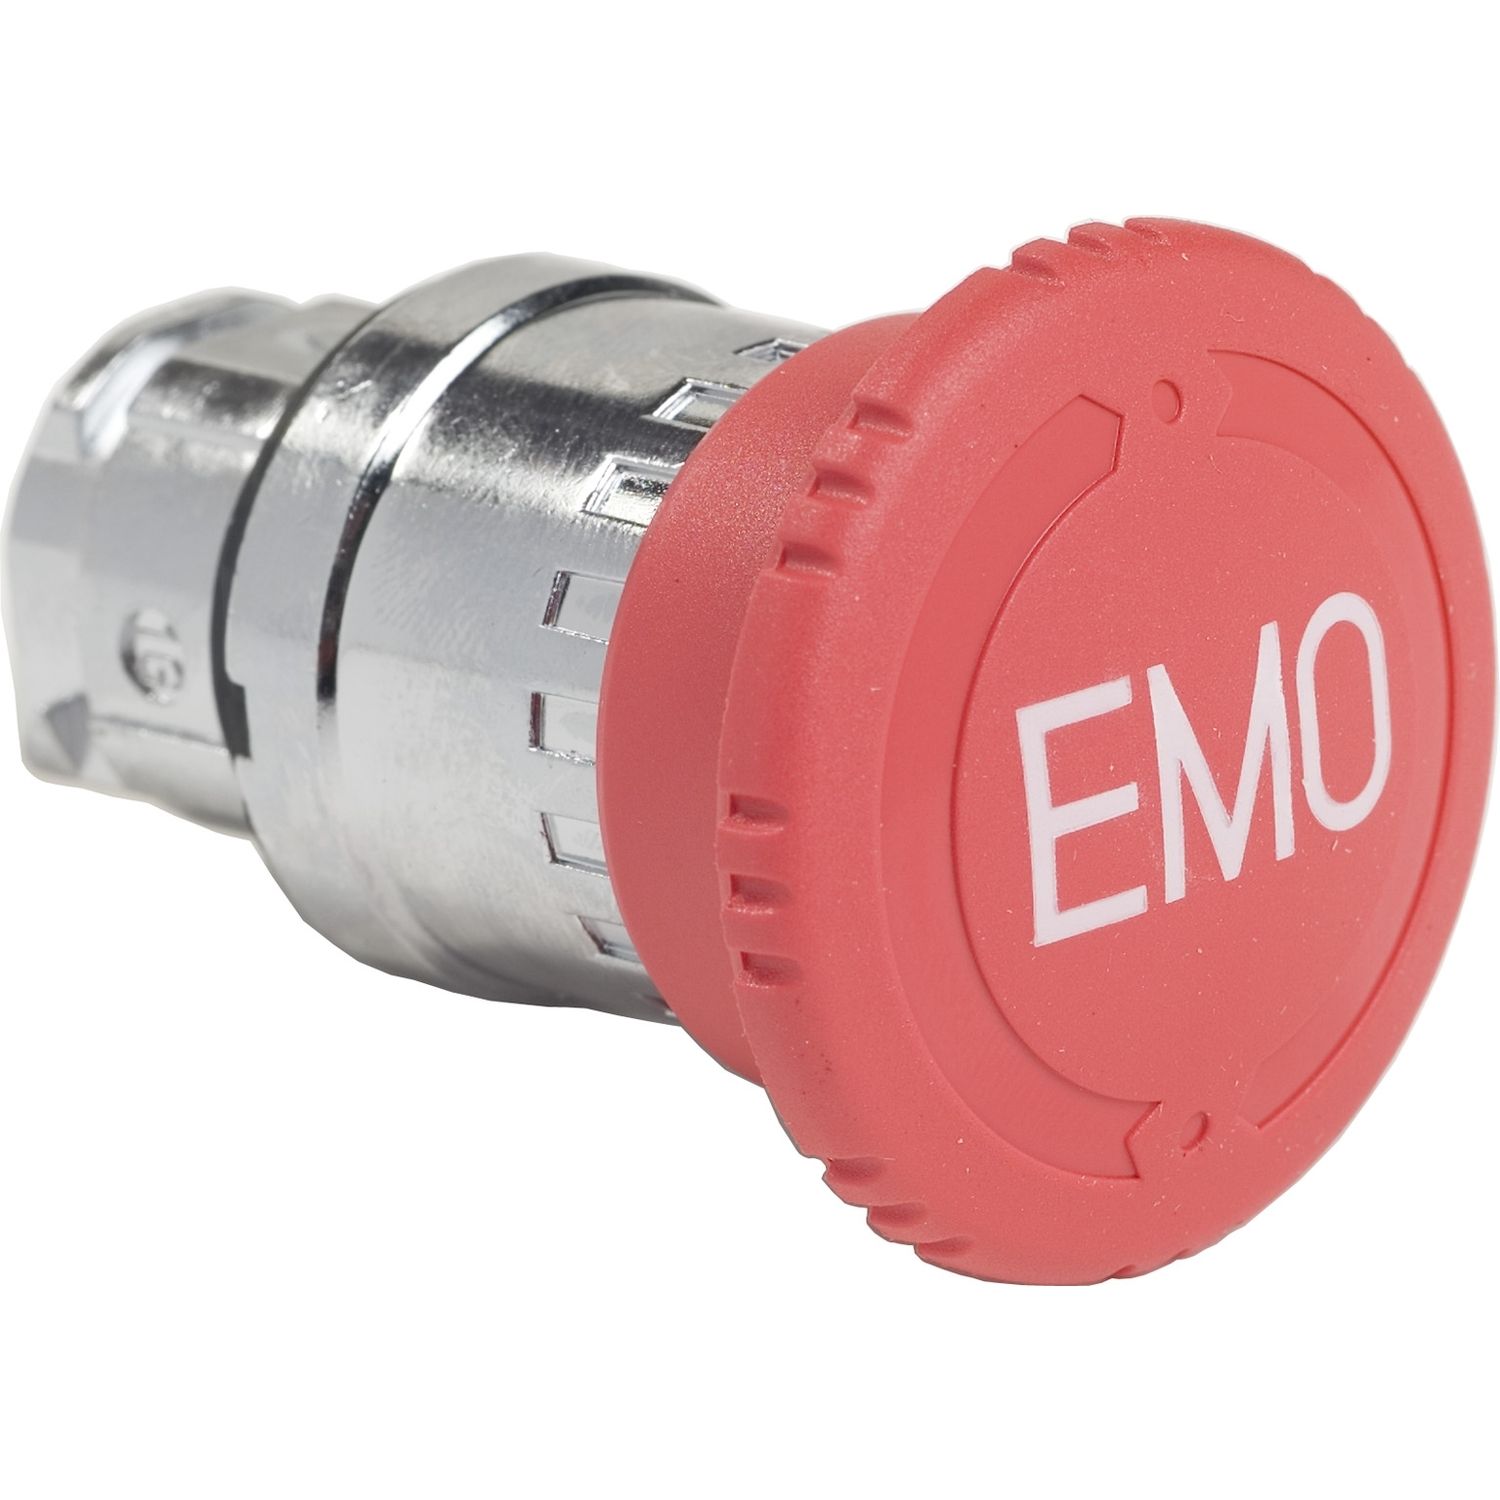 ZB4BS84430 Emergency stop head, Harmony XB4, switching off, metal, red mushroom 40mm, 22mm, trigger latching turn to release, marked EMO